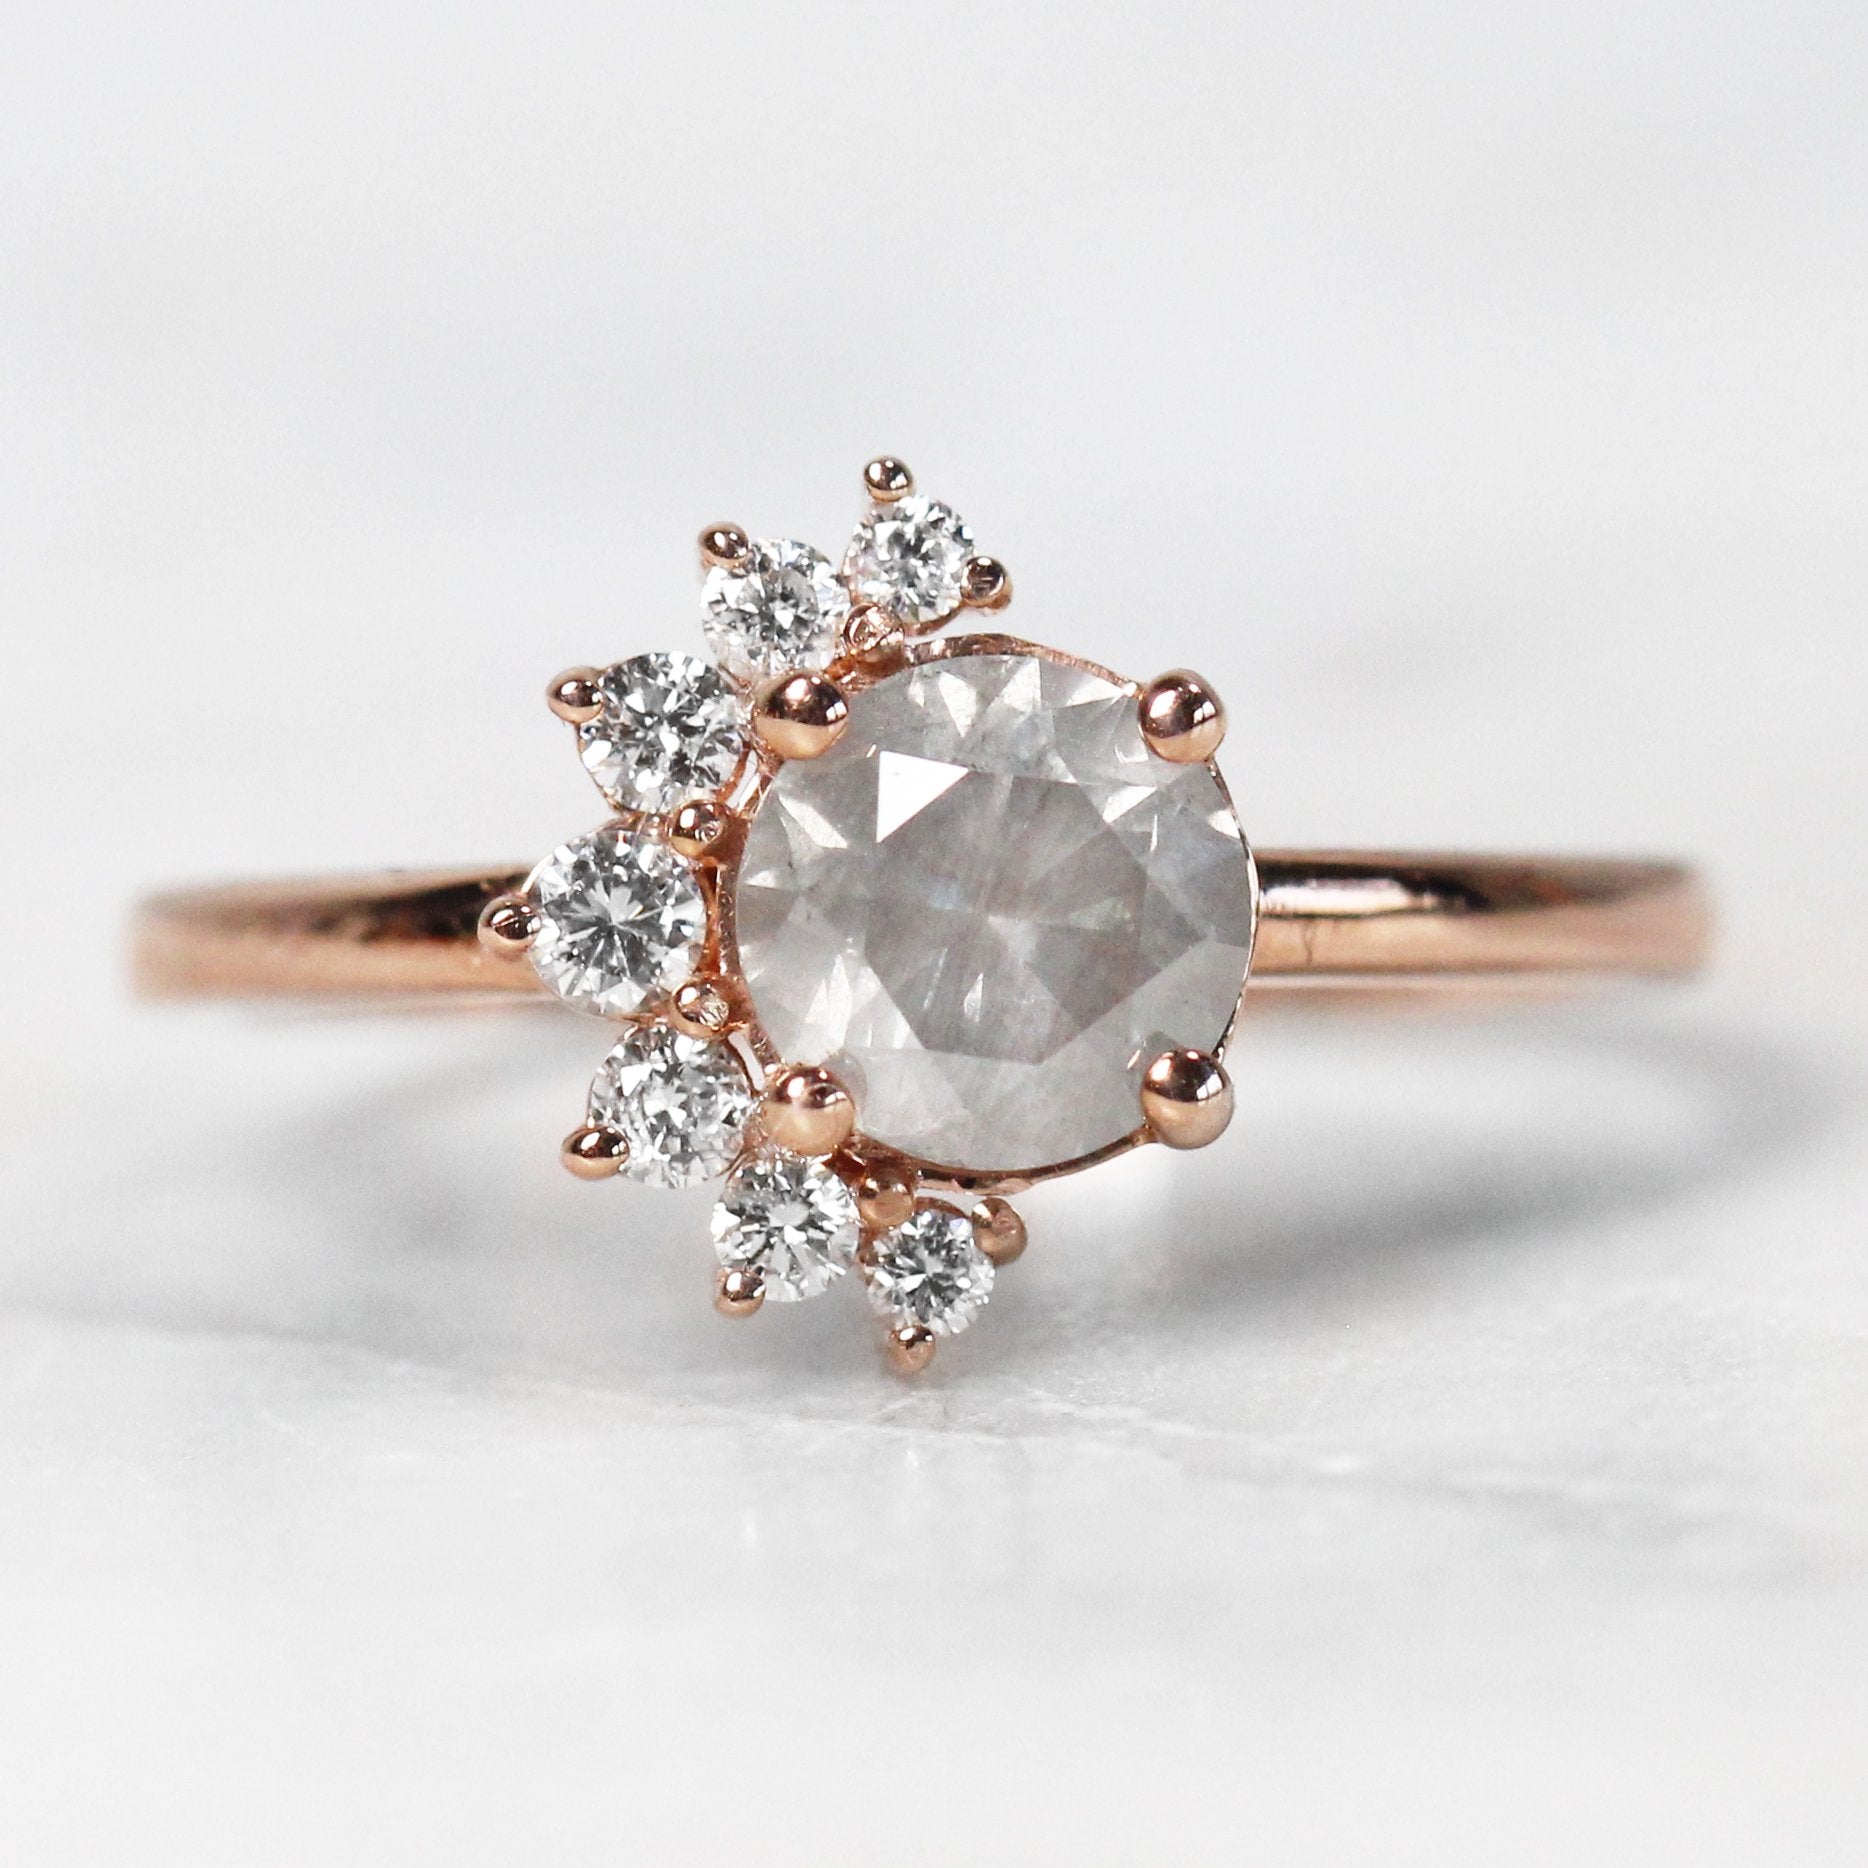 Drew Setting - Midwinter Co. Alternative Bridal Rings and Modern Fine Jewelry